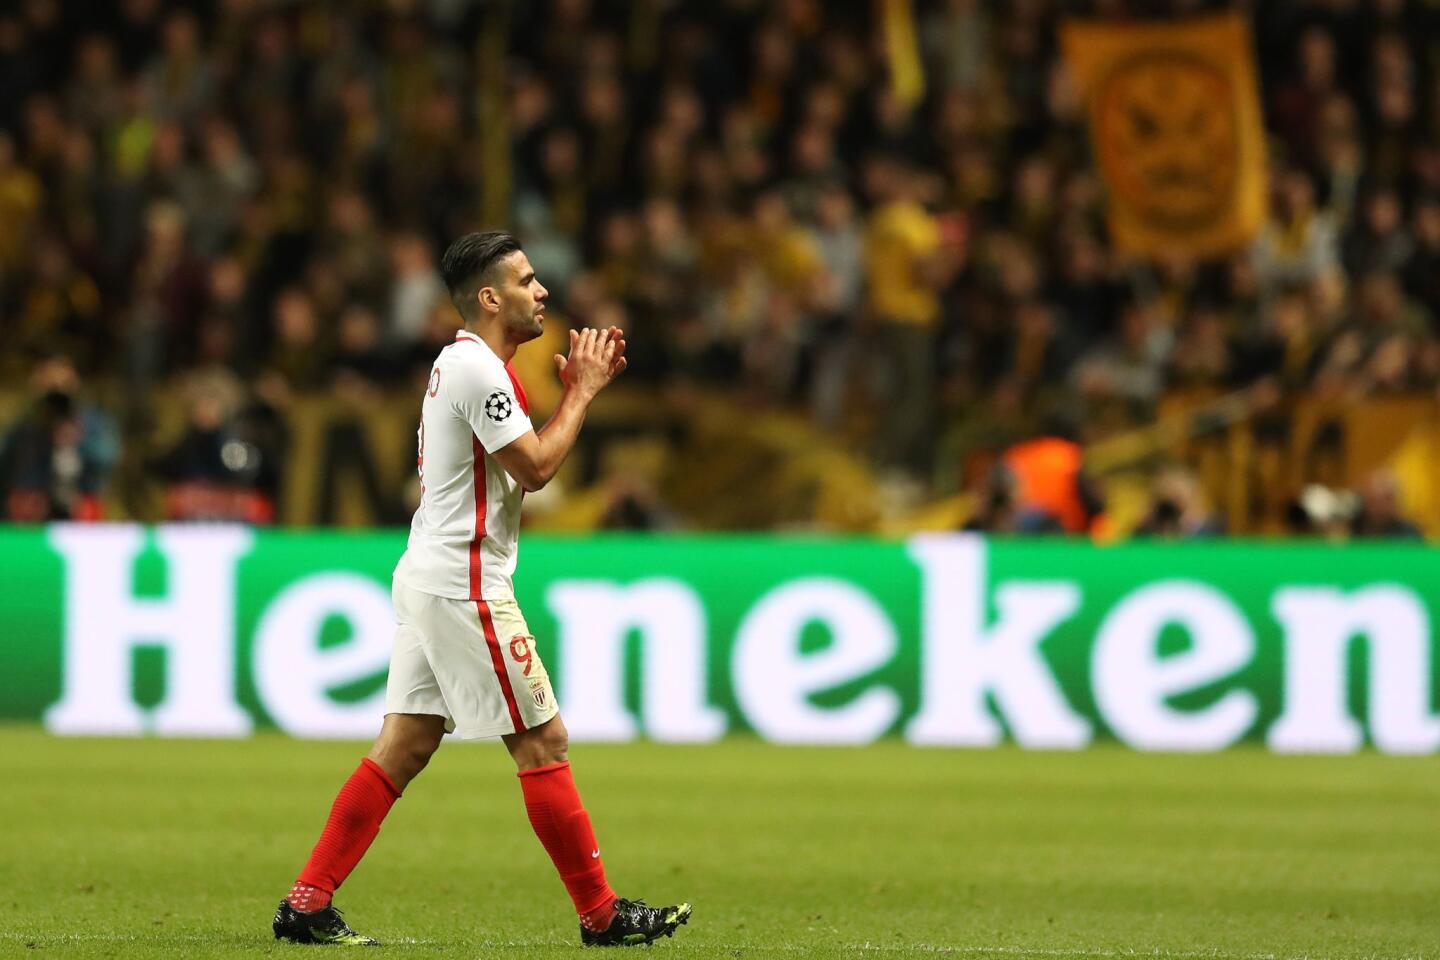 Monaco's Colombian forward Radamel Falcao acknowledges the public as he is substituted during the UEFA Champions League 2nd leg quarter-final football match AS Monaco v BVB Borussia Dortmund on April 19, 2017 at the Louis II stadium in Monaco. / AFP PHOTO / Valery HACHEVALERY HACHE/AFP/Getty Images ** OUTS - ELSENT, FPG, CM - OUTS * NM, PH, VA if sourced by CT, LA or MoD **